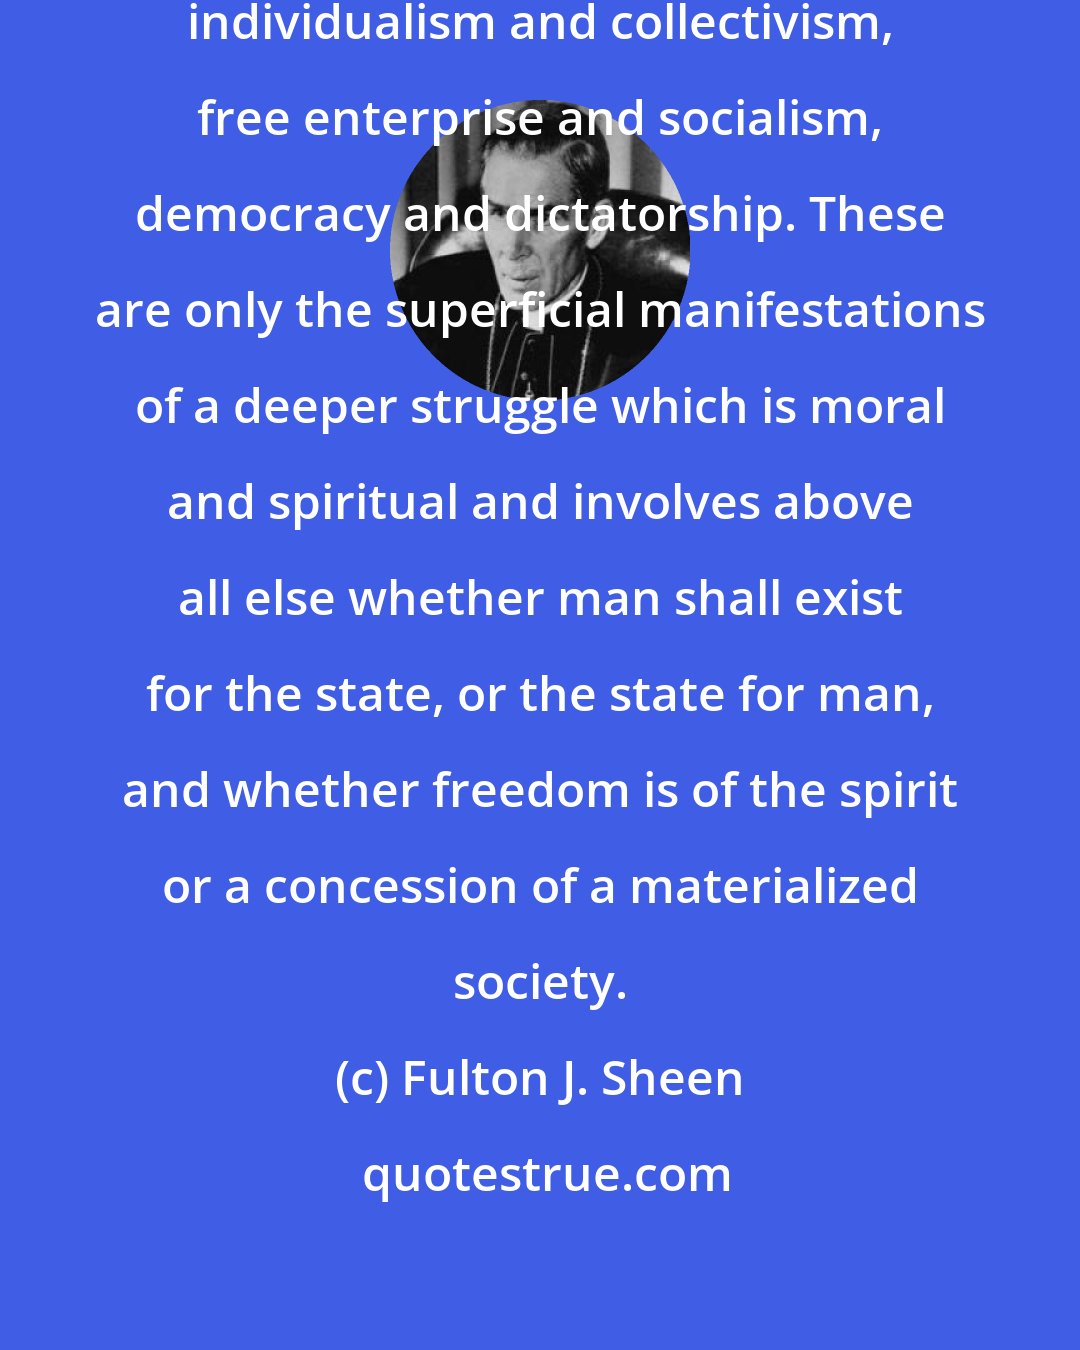 Fulton J. Sheen: The basic struggle today is not between individualism and collectivism, free enterprise and socialism, democracy and dictatorship. These are only the superficial manifestations of a deeper struggle which is moral and spiritual and involves above all else whether man shall exist for the state, or the state for man, and whether freedom is of the spirit or a concession of a materialized society.